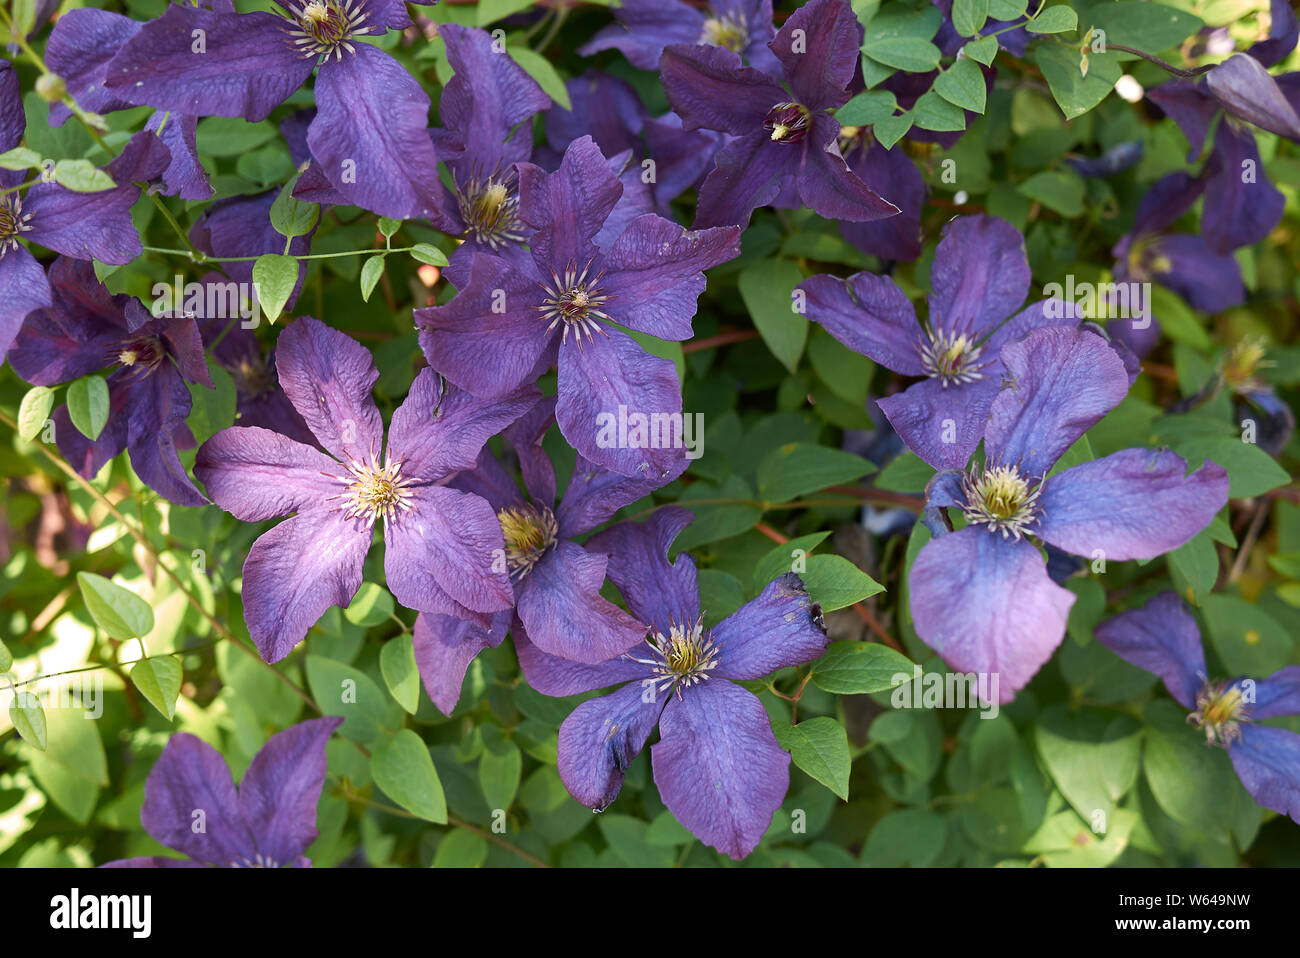 Clematis viticella purple flower close up Stock Photo